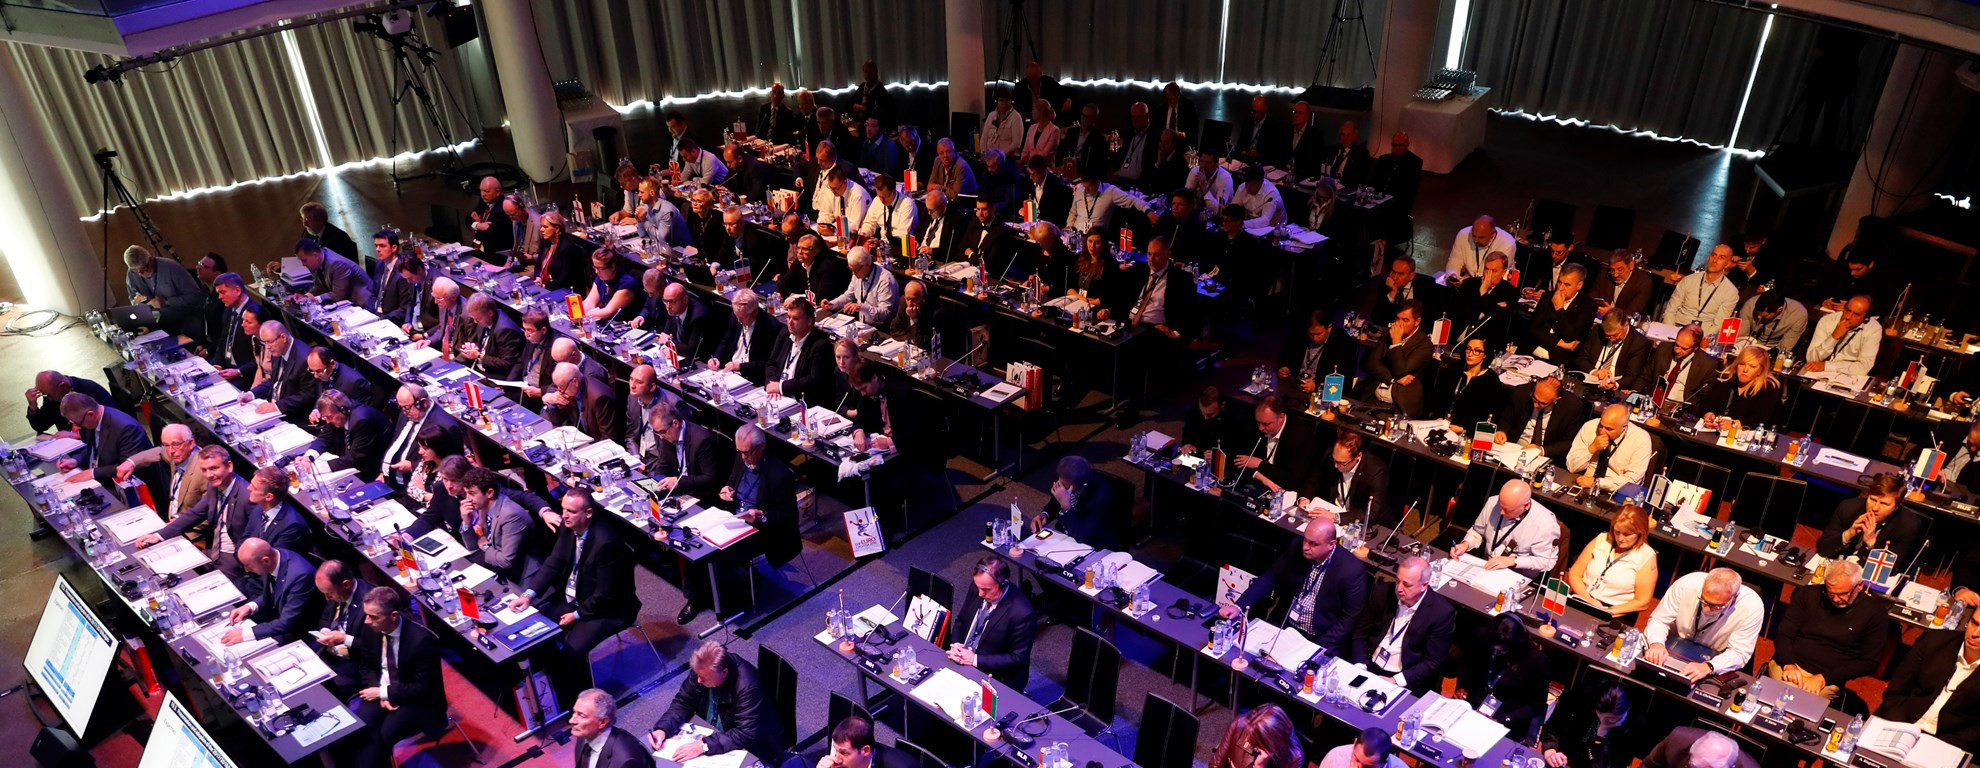 The EHF has received 21 nominations for its Executive Committee ©EHF